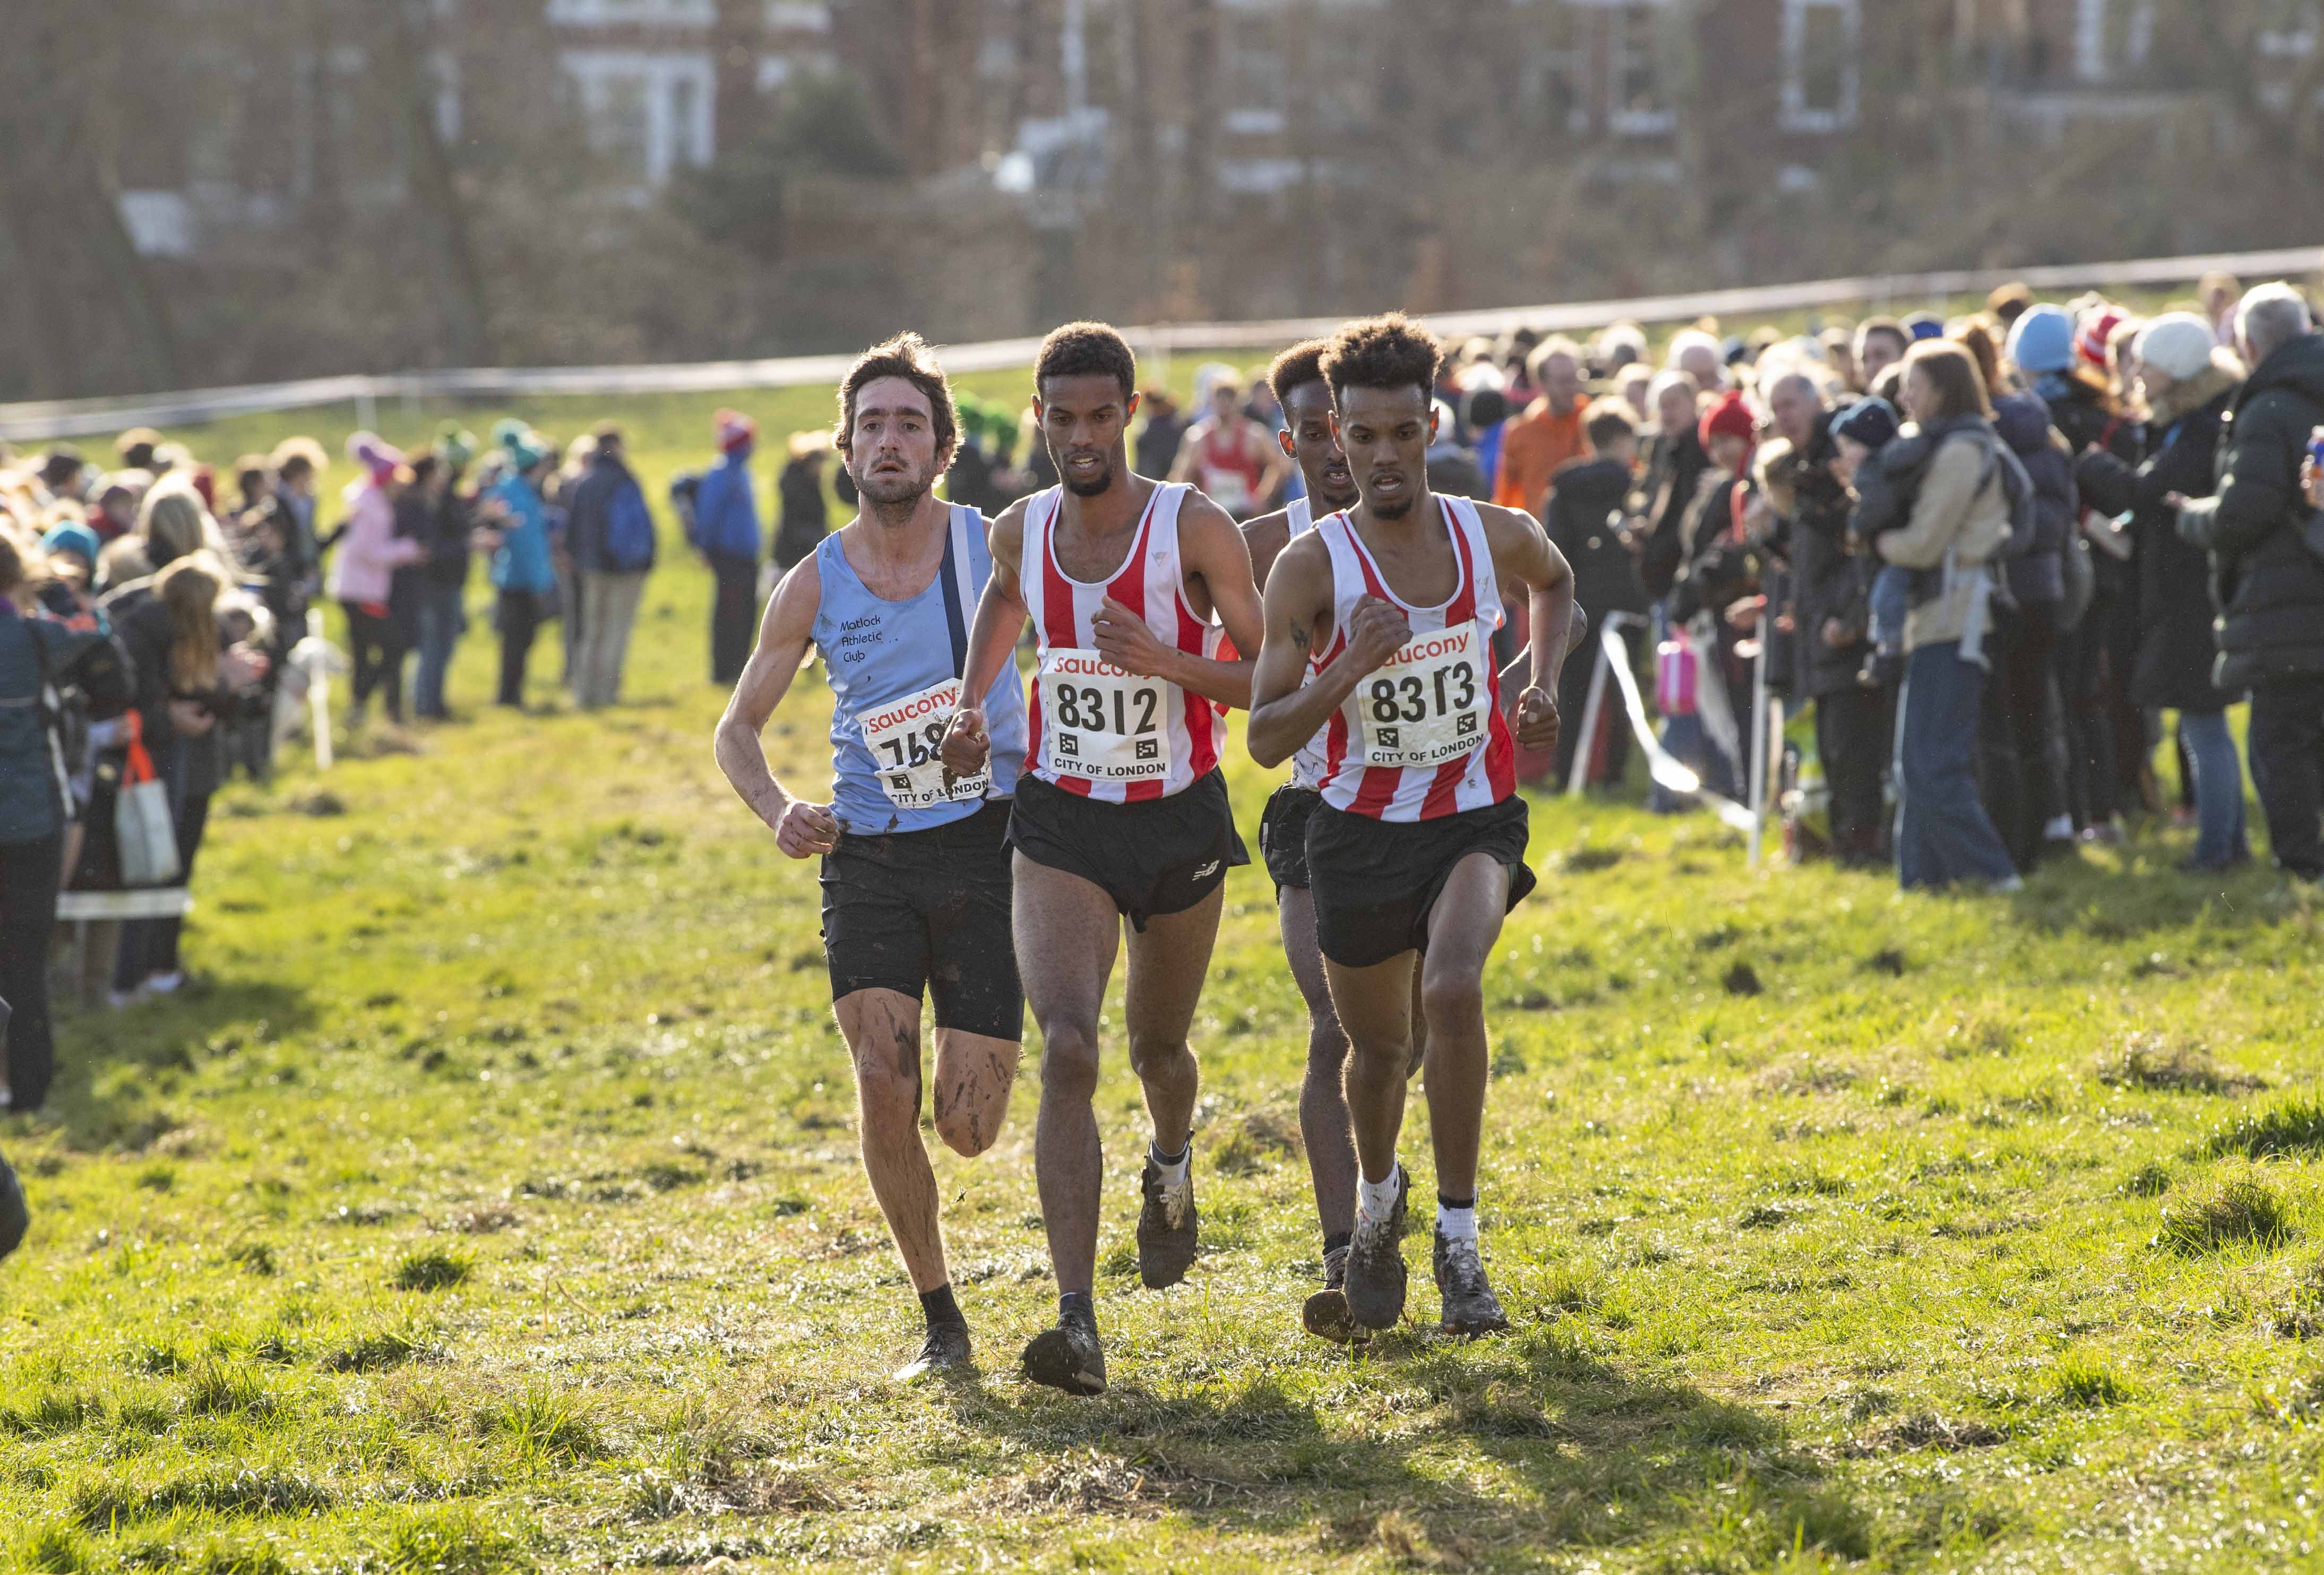 Gallery 2022 English National XC English Cross Country Association